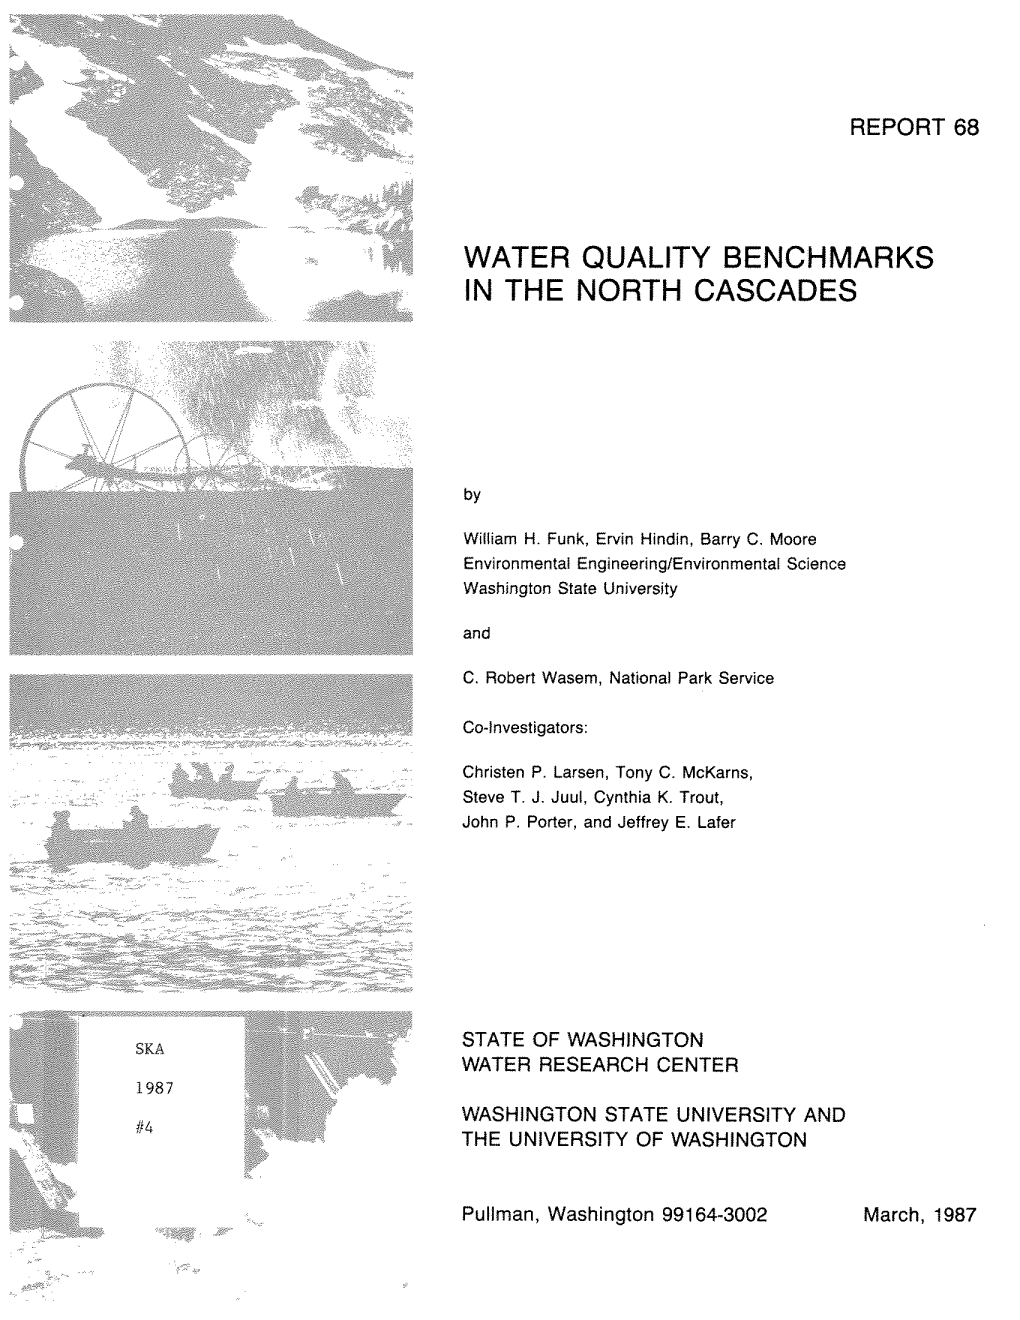 Water Quality Benchmarks in the North Cascades